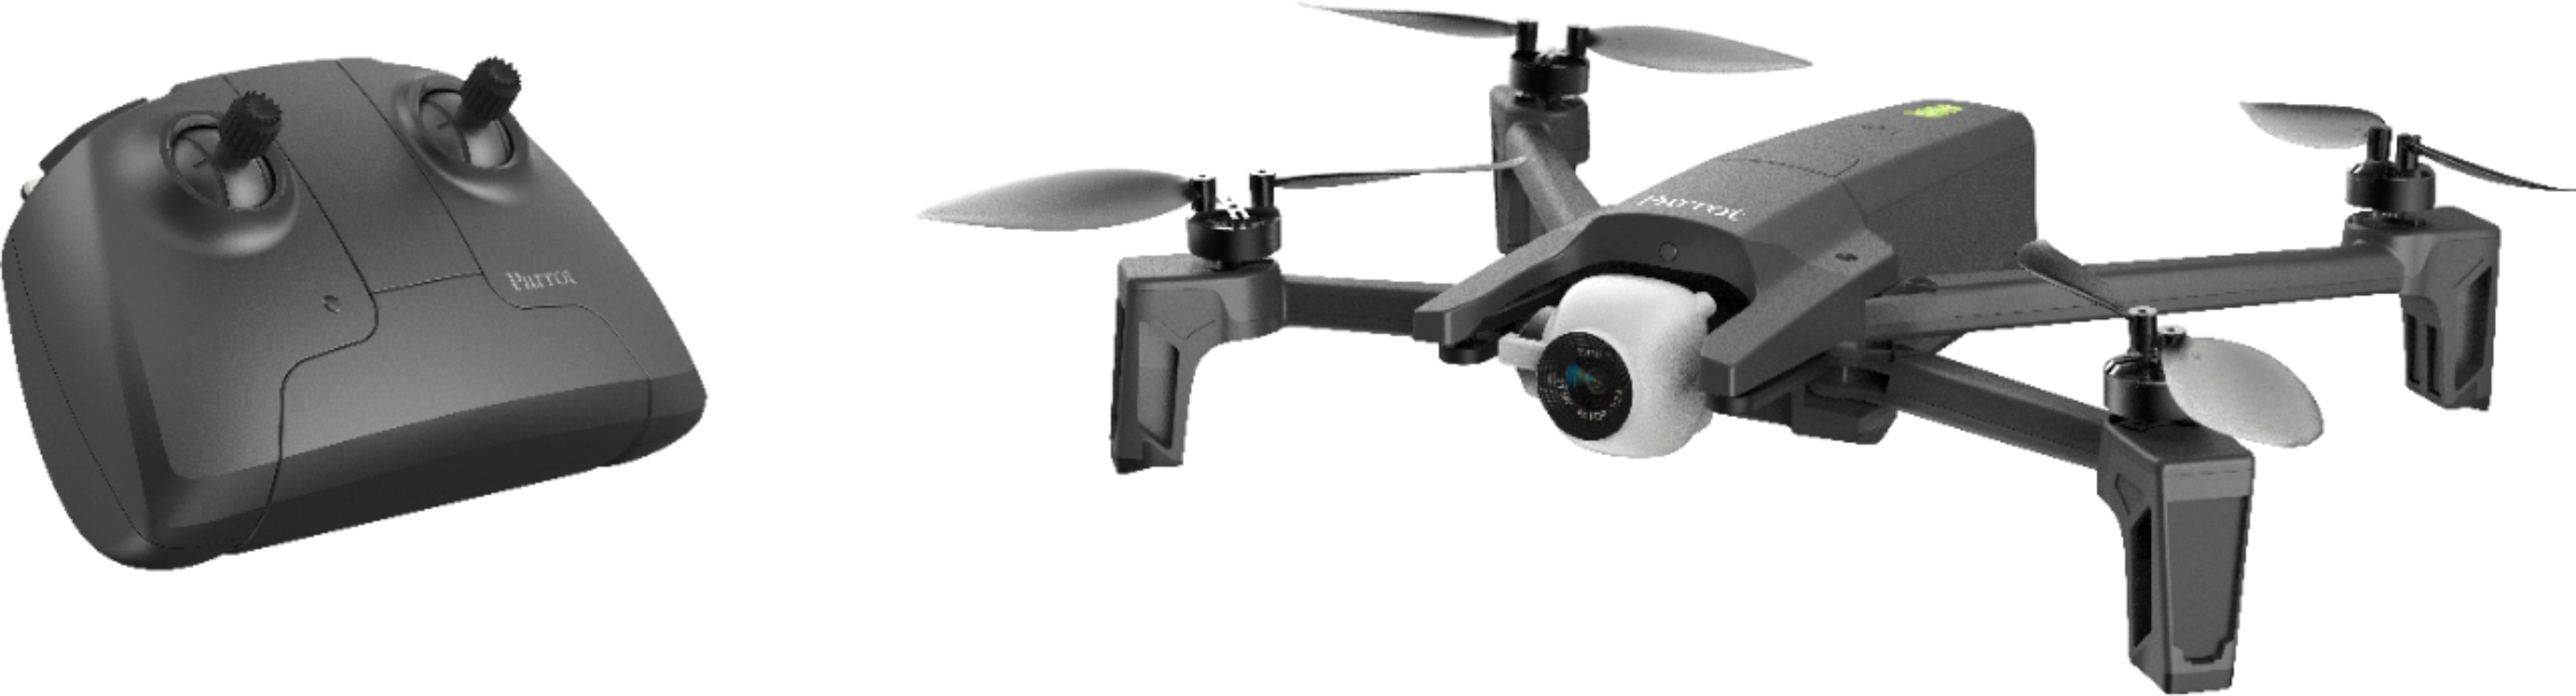 Best Buy: Parrot ANAFI 4K Quadcopter with Remote Controller Black 